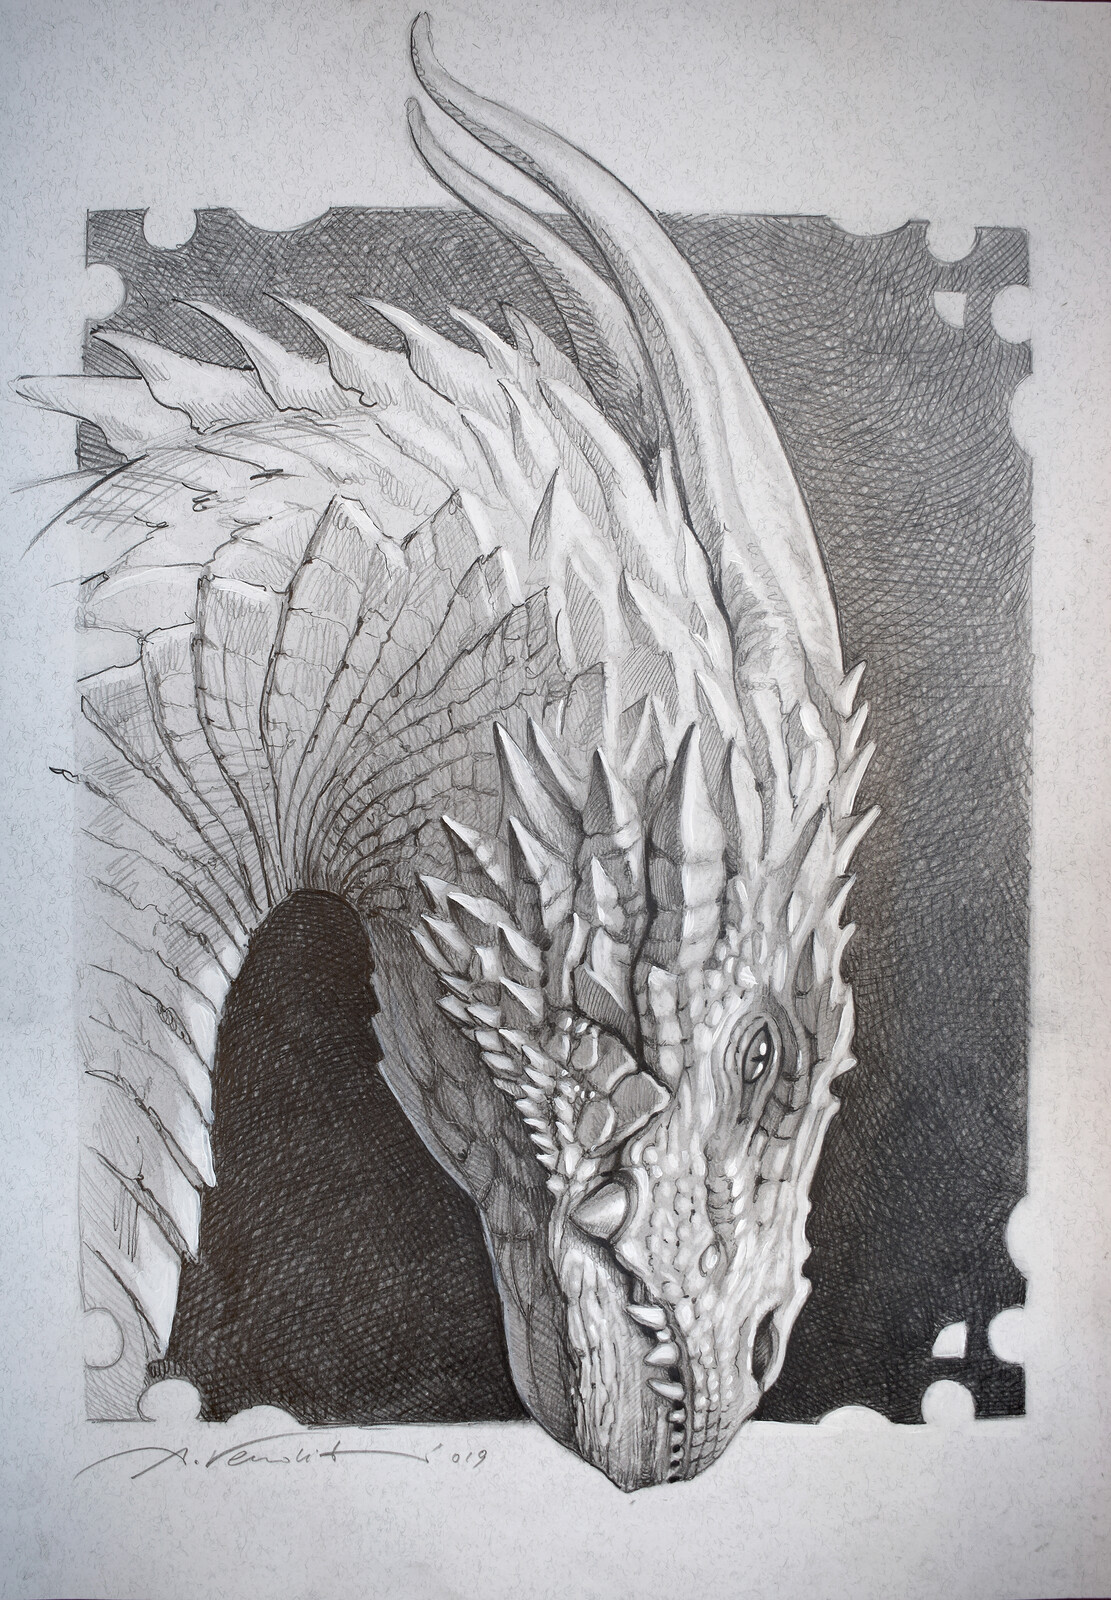 only the dragon head - pencil on paper 2019